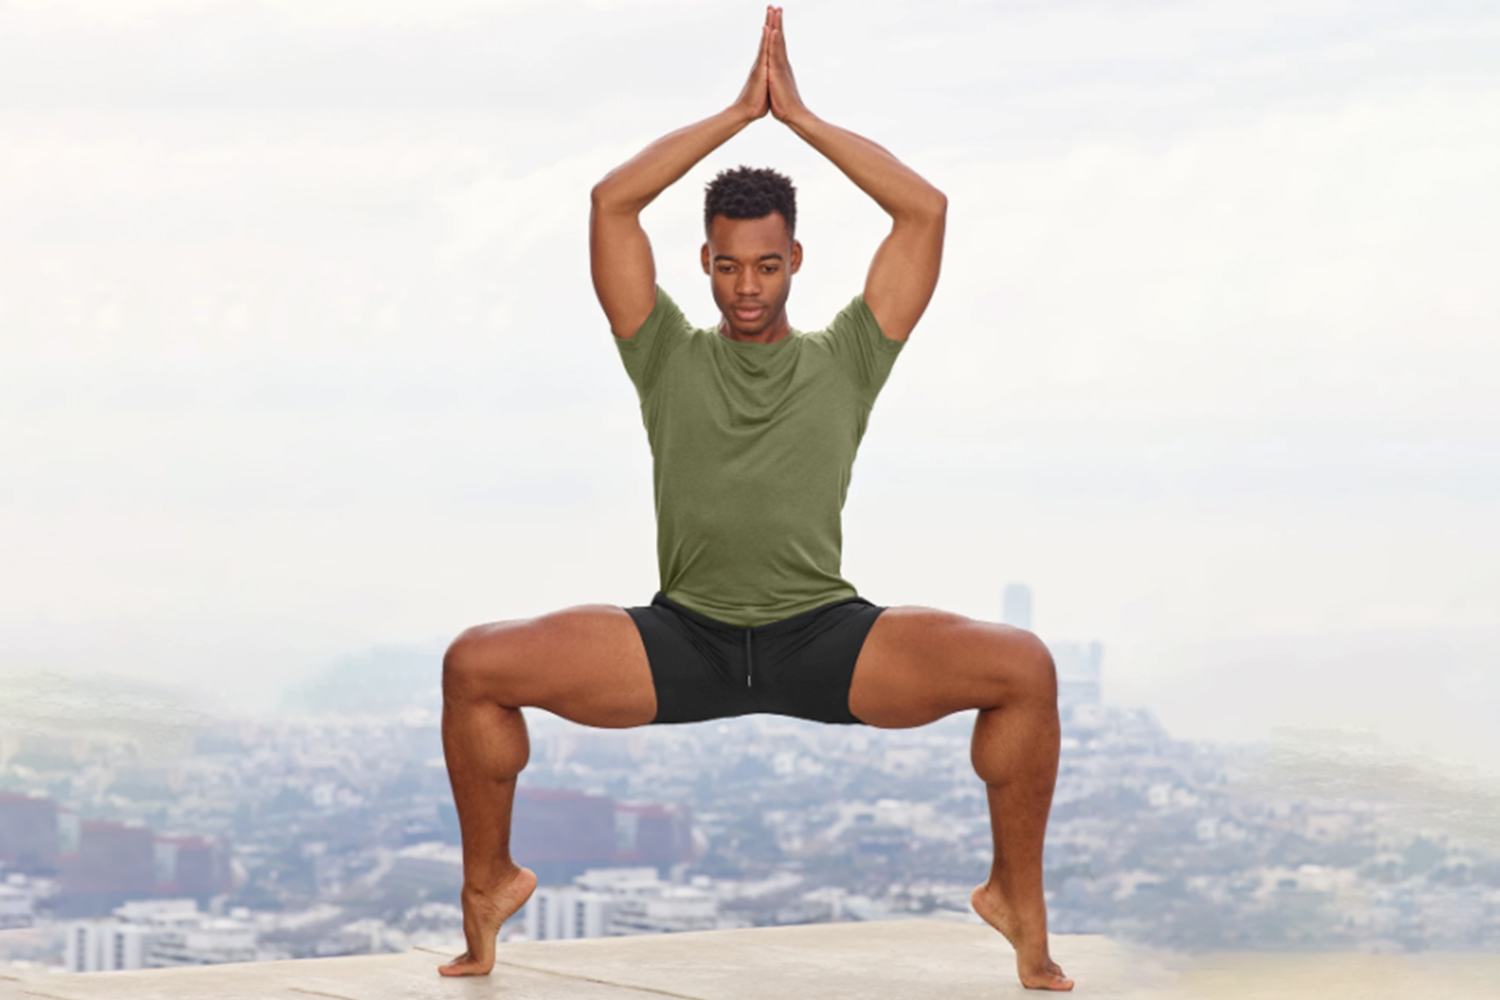 10 Men's Performance Shorts and Pants From Alo Yoga to Help Enhance Your  Workouts